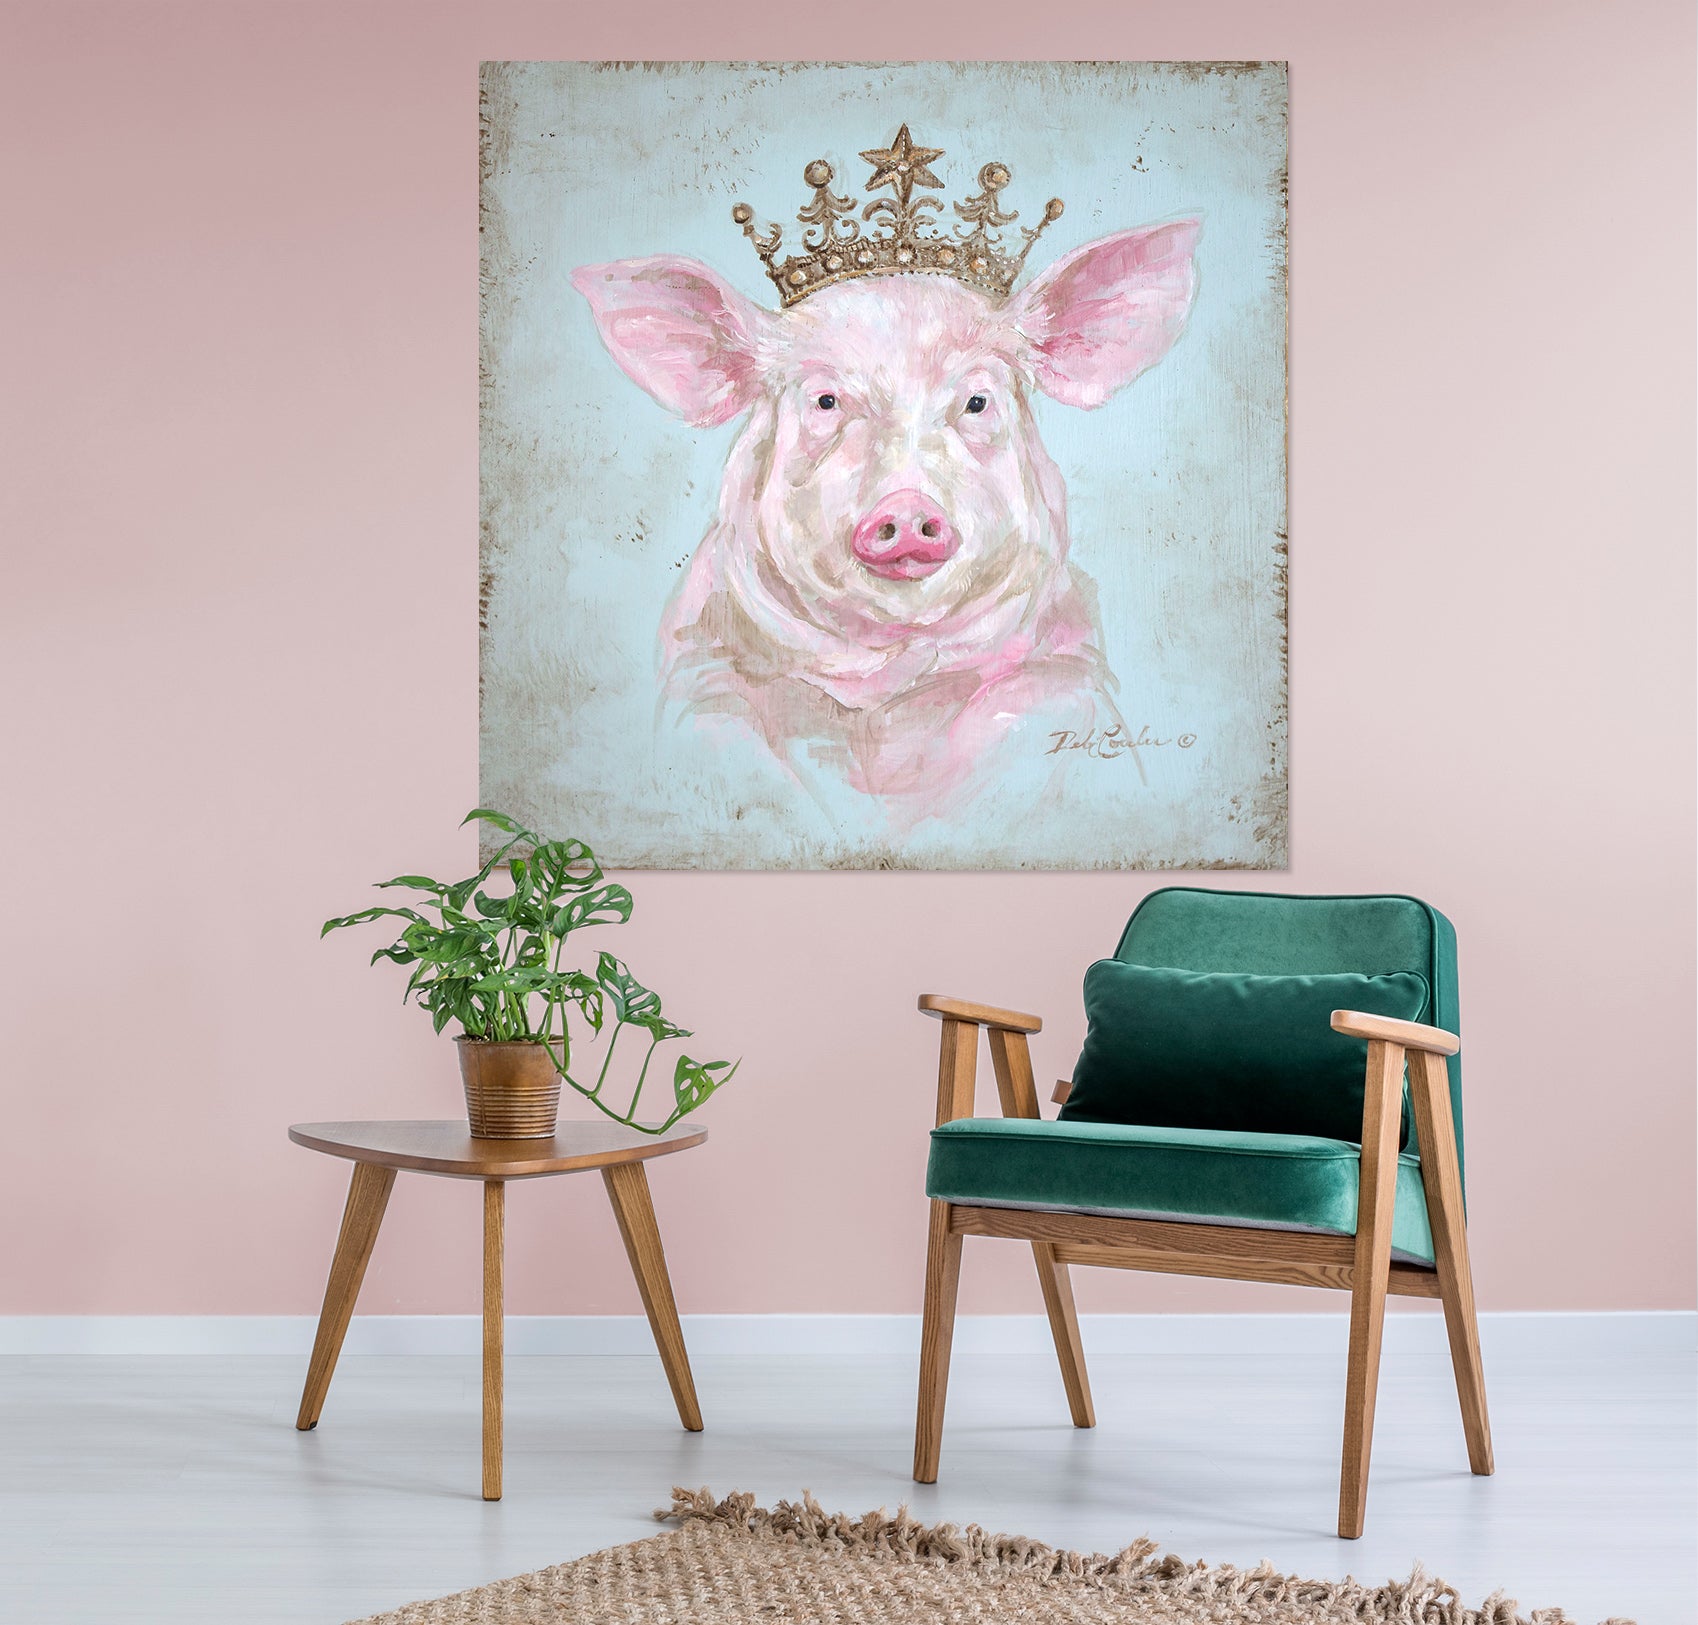 3D Pink Pig 013 Debi Coules Wall Sticker